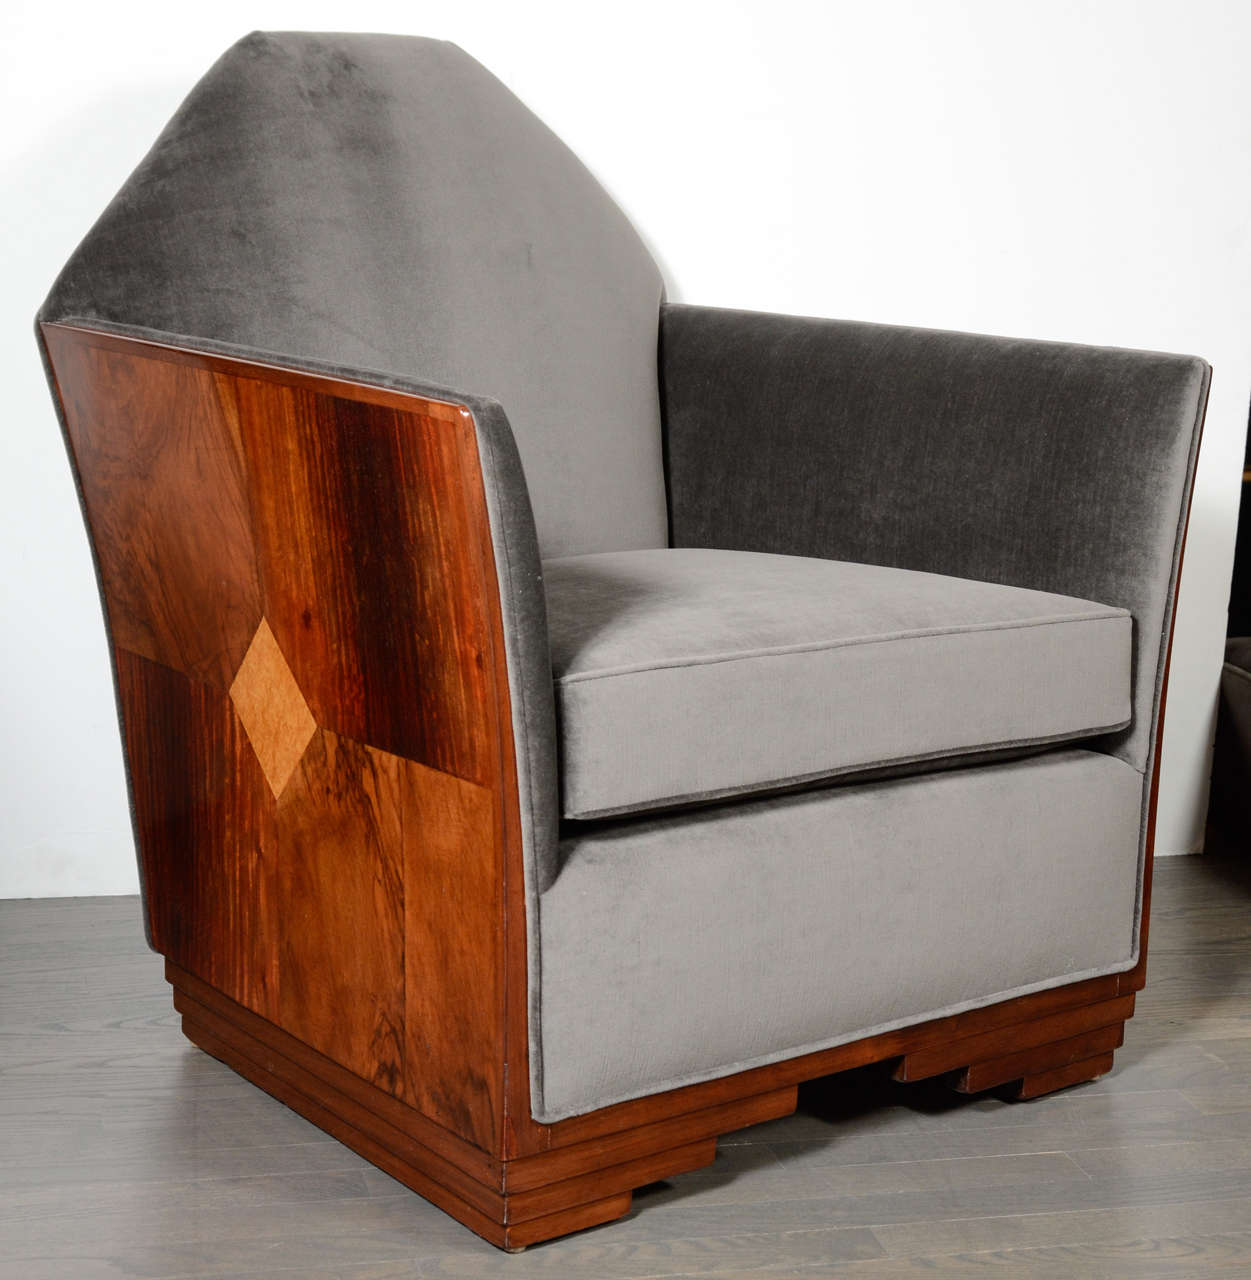 This stunning Art Deco Skyscraper style chair features book matched inlaid burled walnut & elm in a Art Deco geometric design. It has fine, splayed arms, an upholstered apron with a stepped skyscraper style base. Upholstered in luxurious platinum